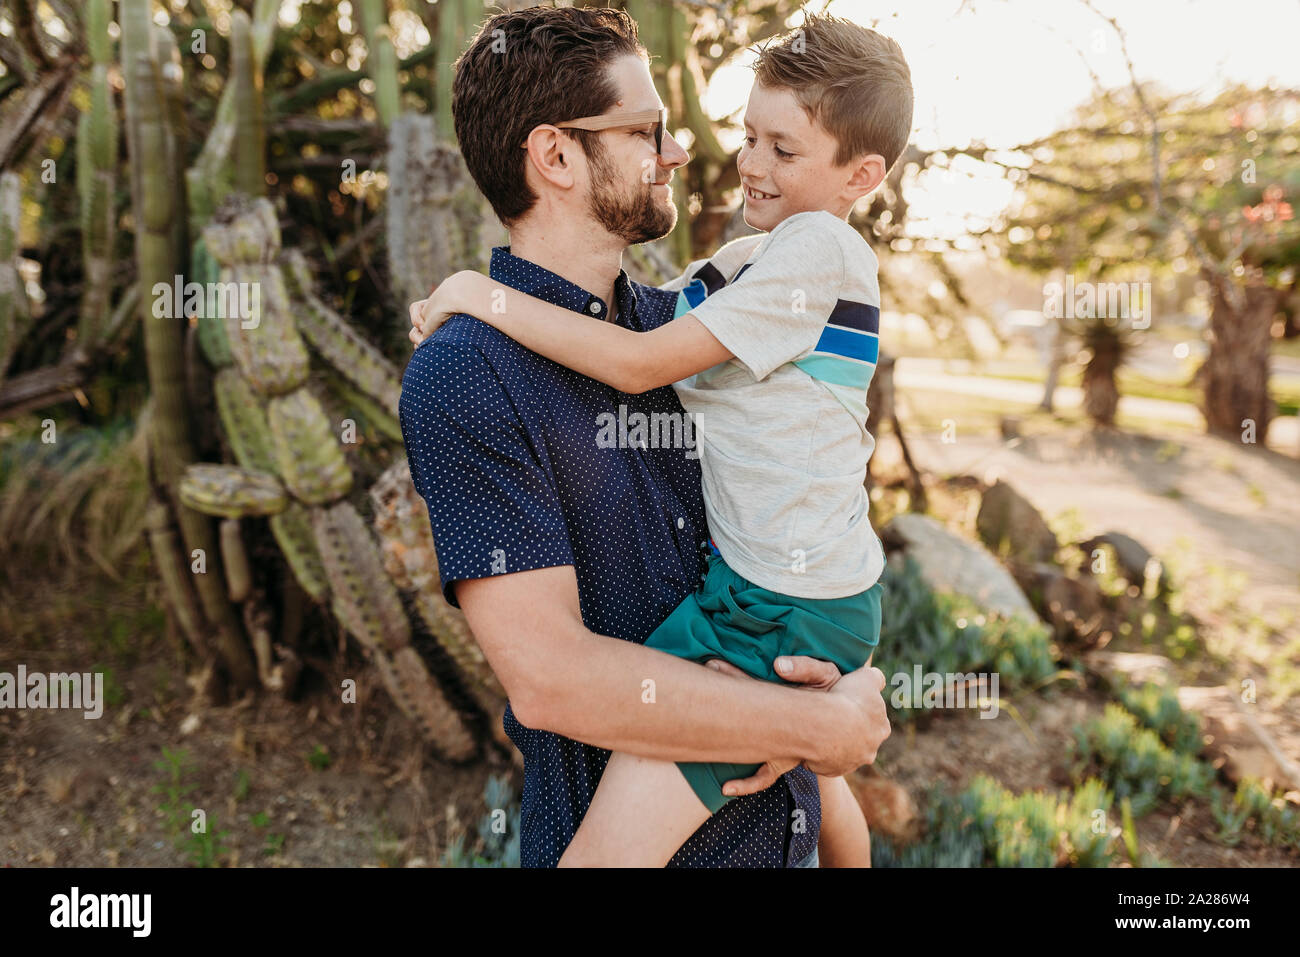 Portrait of father holding older son and smiling at each other Stock Photo